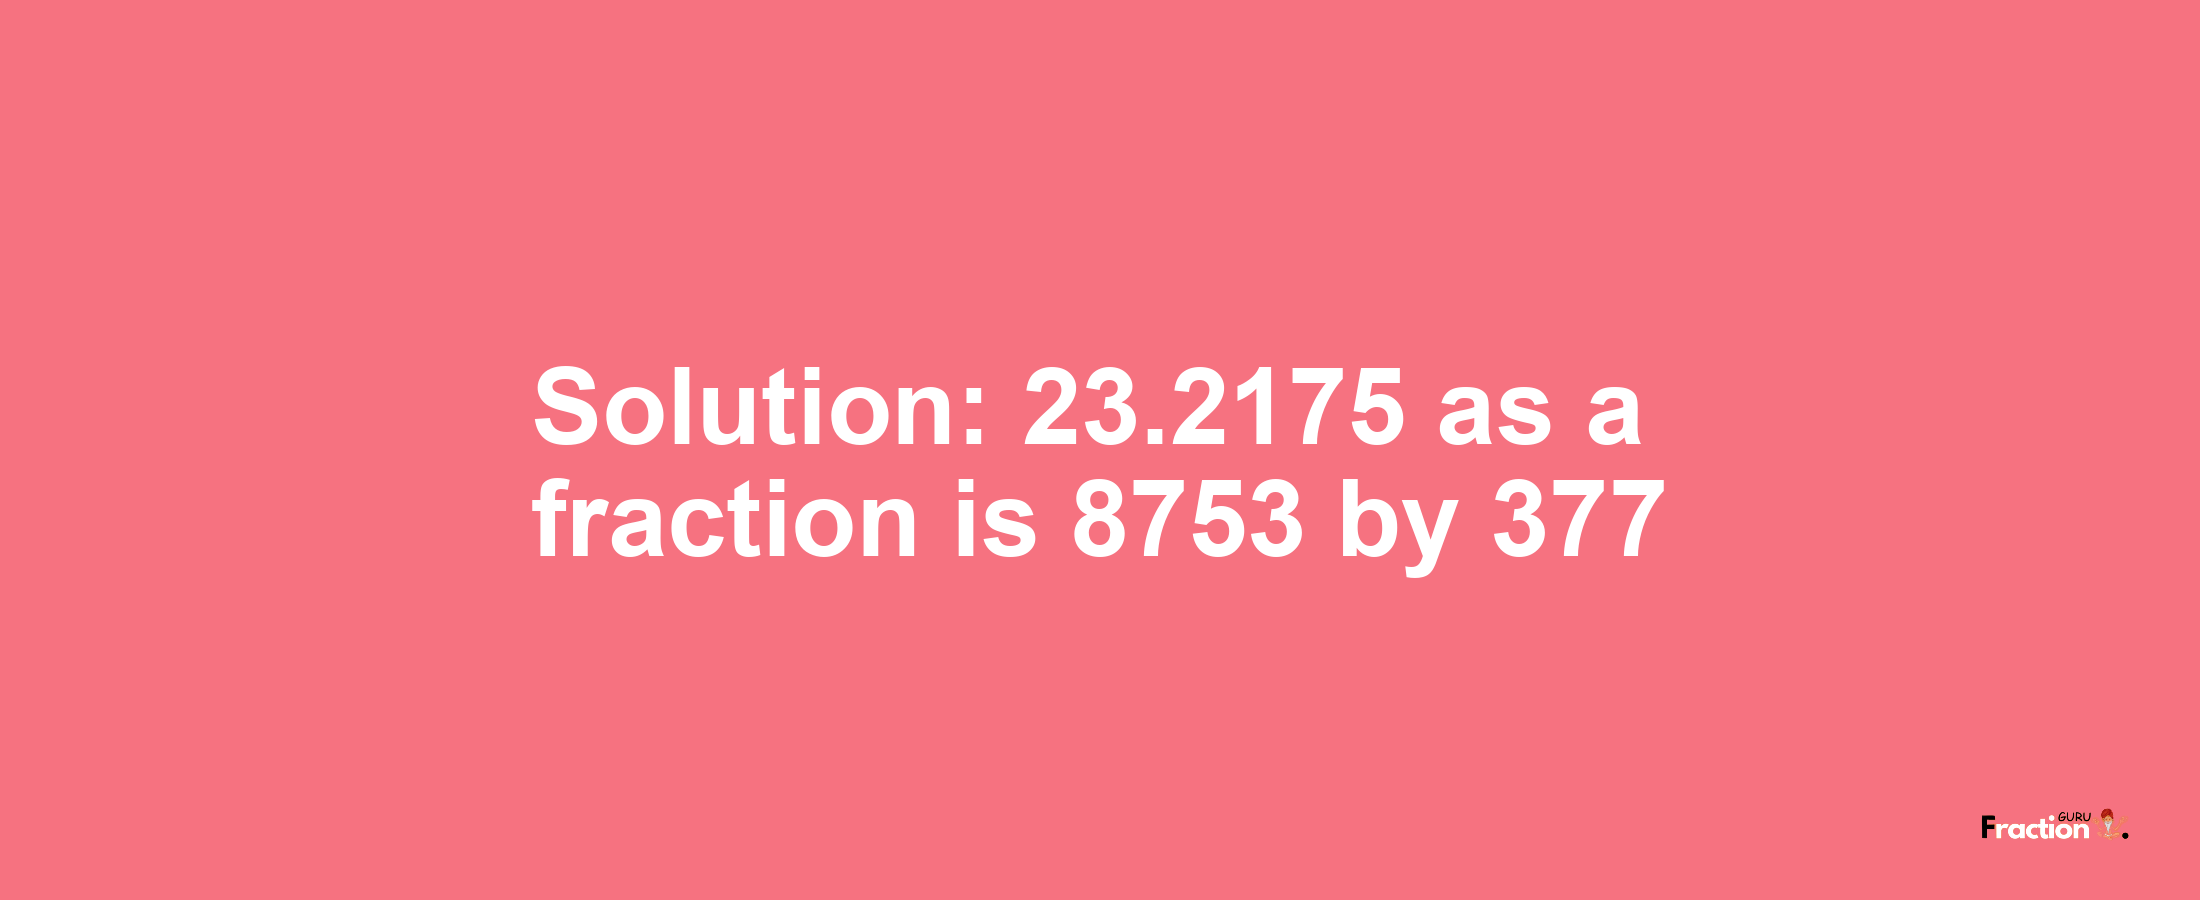 Solution:23.2175 as a fraction is 8753/377